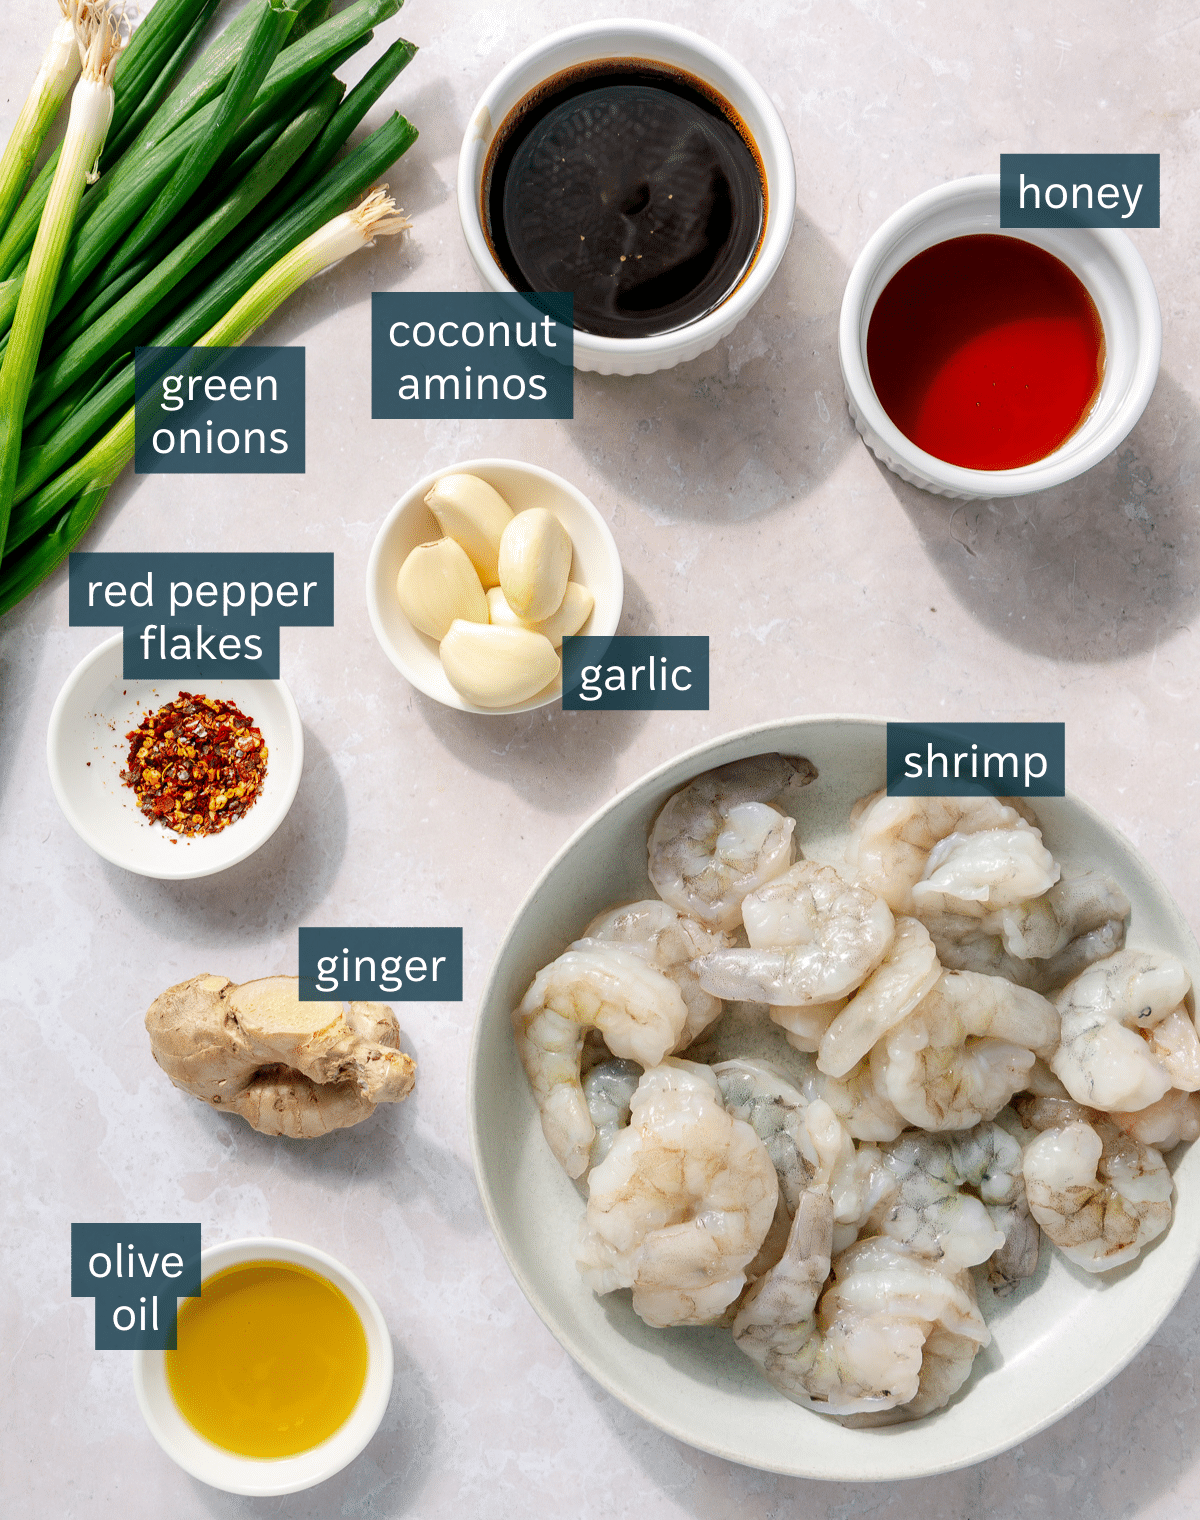 All of the ingredients needed for honey garlic shrimp in different sized bowls on a light pink surface.